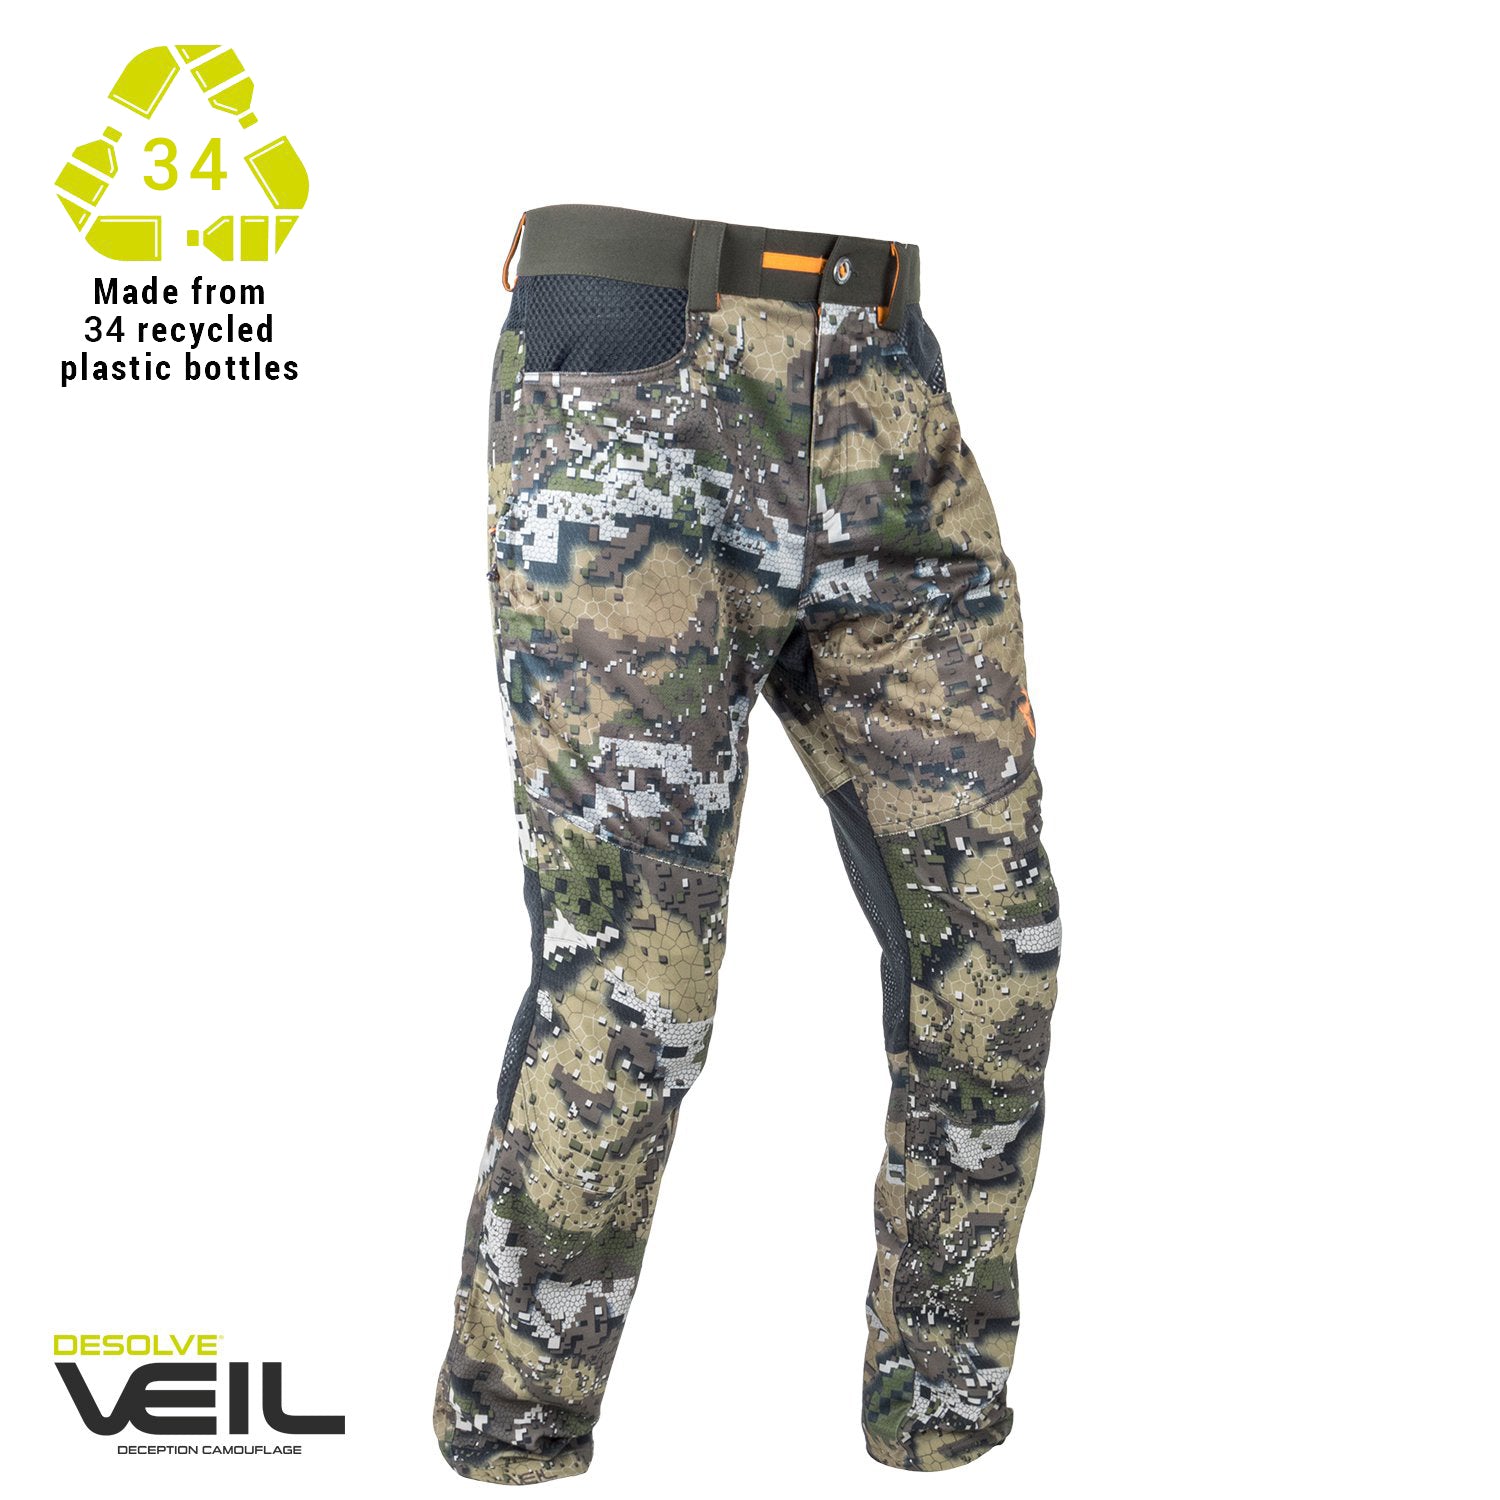 Hunters Element, Spur Pants, 4-Way Stretch Zip Up Hunting Pants